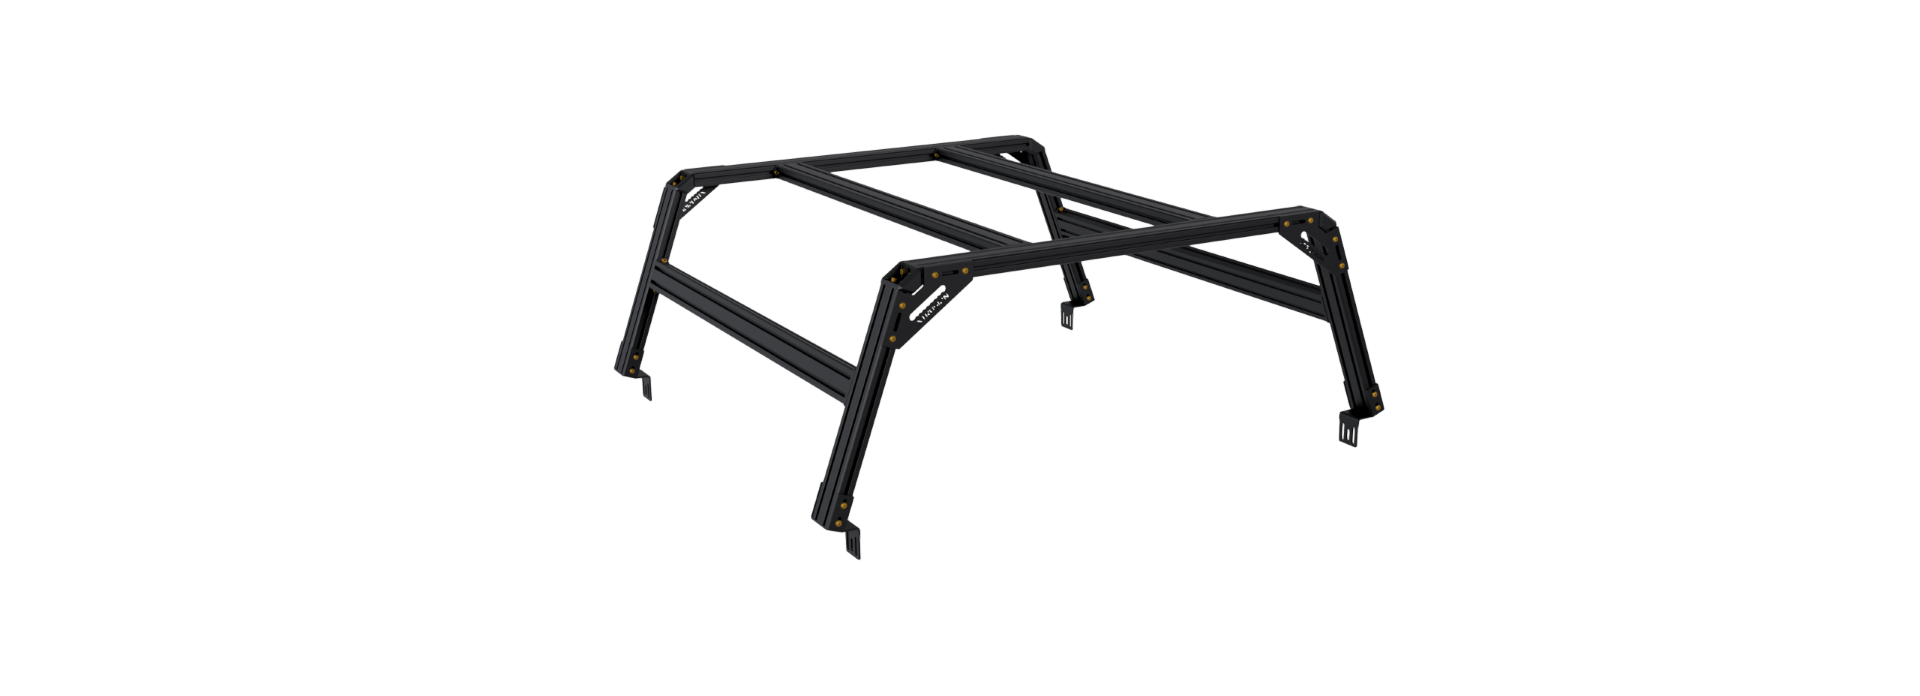 XTR1 Build-Your-Own Bed Rack - Toyota Tacoma